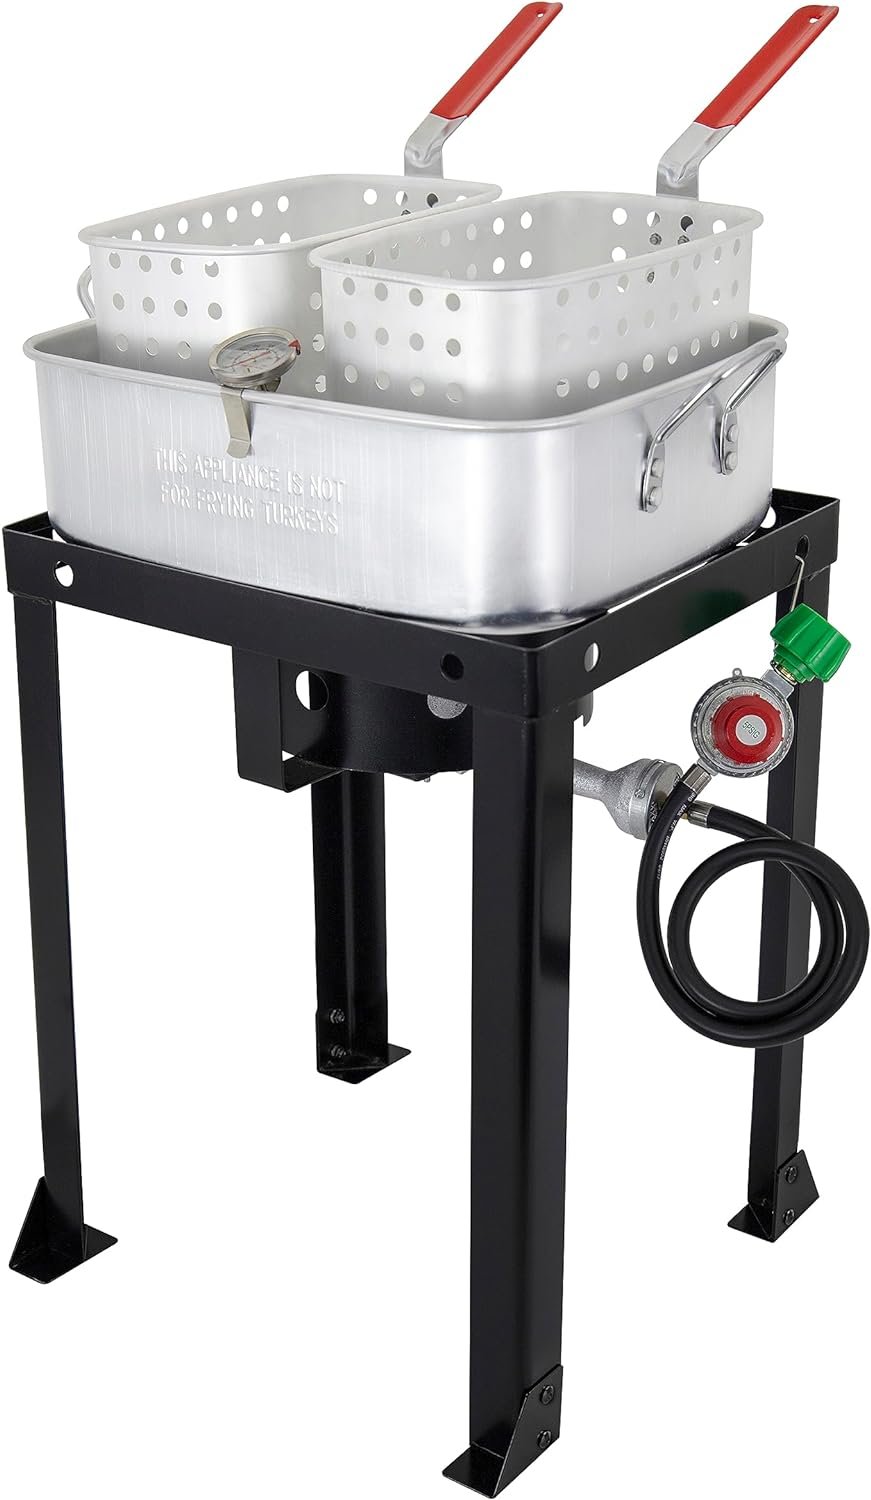 Chard Double Basket Outdoor Fish and Wing fryer, 18 quart, Black